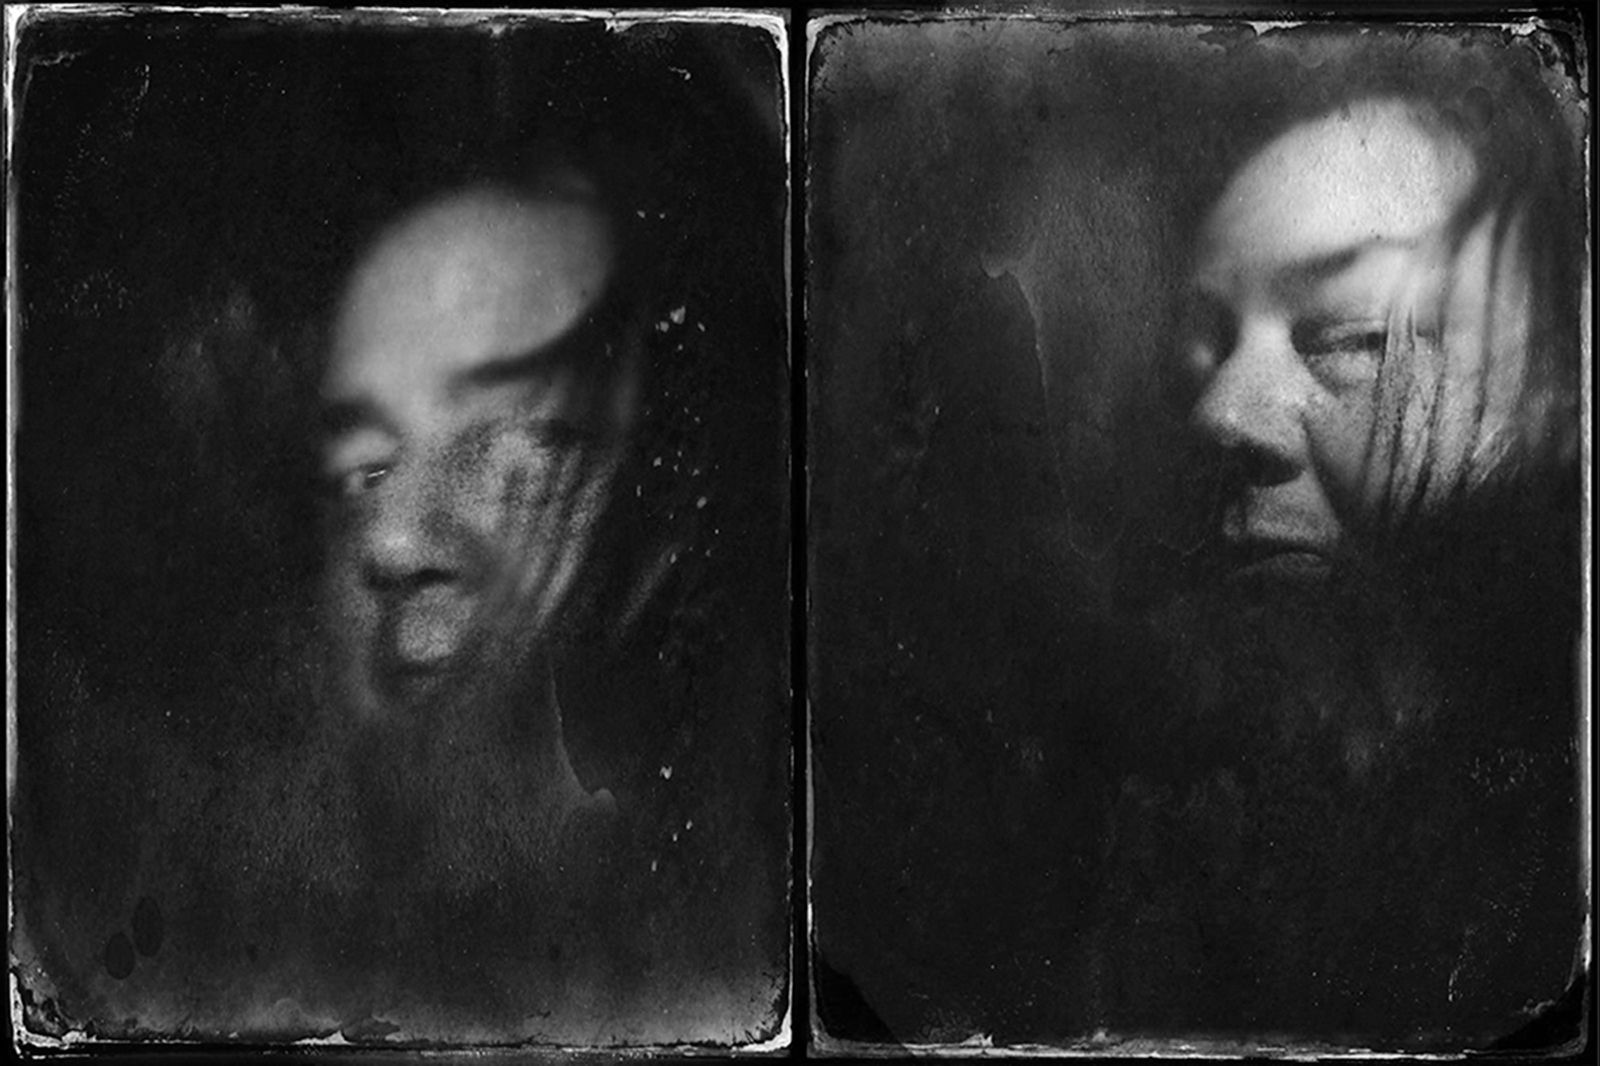 © Diane Fenster - Image from the A Long History Of Dark Sleep photography project